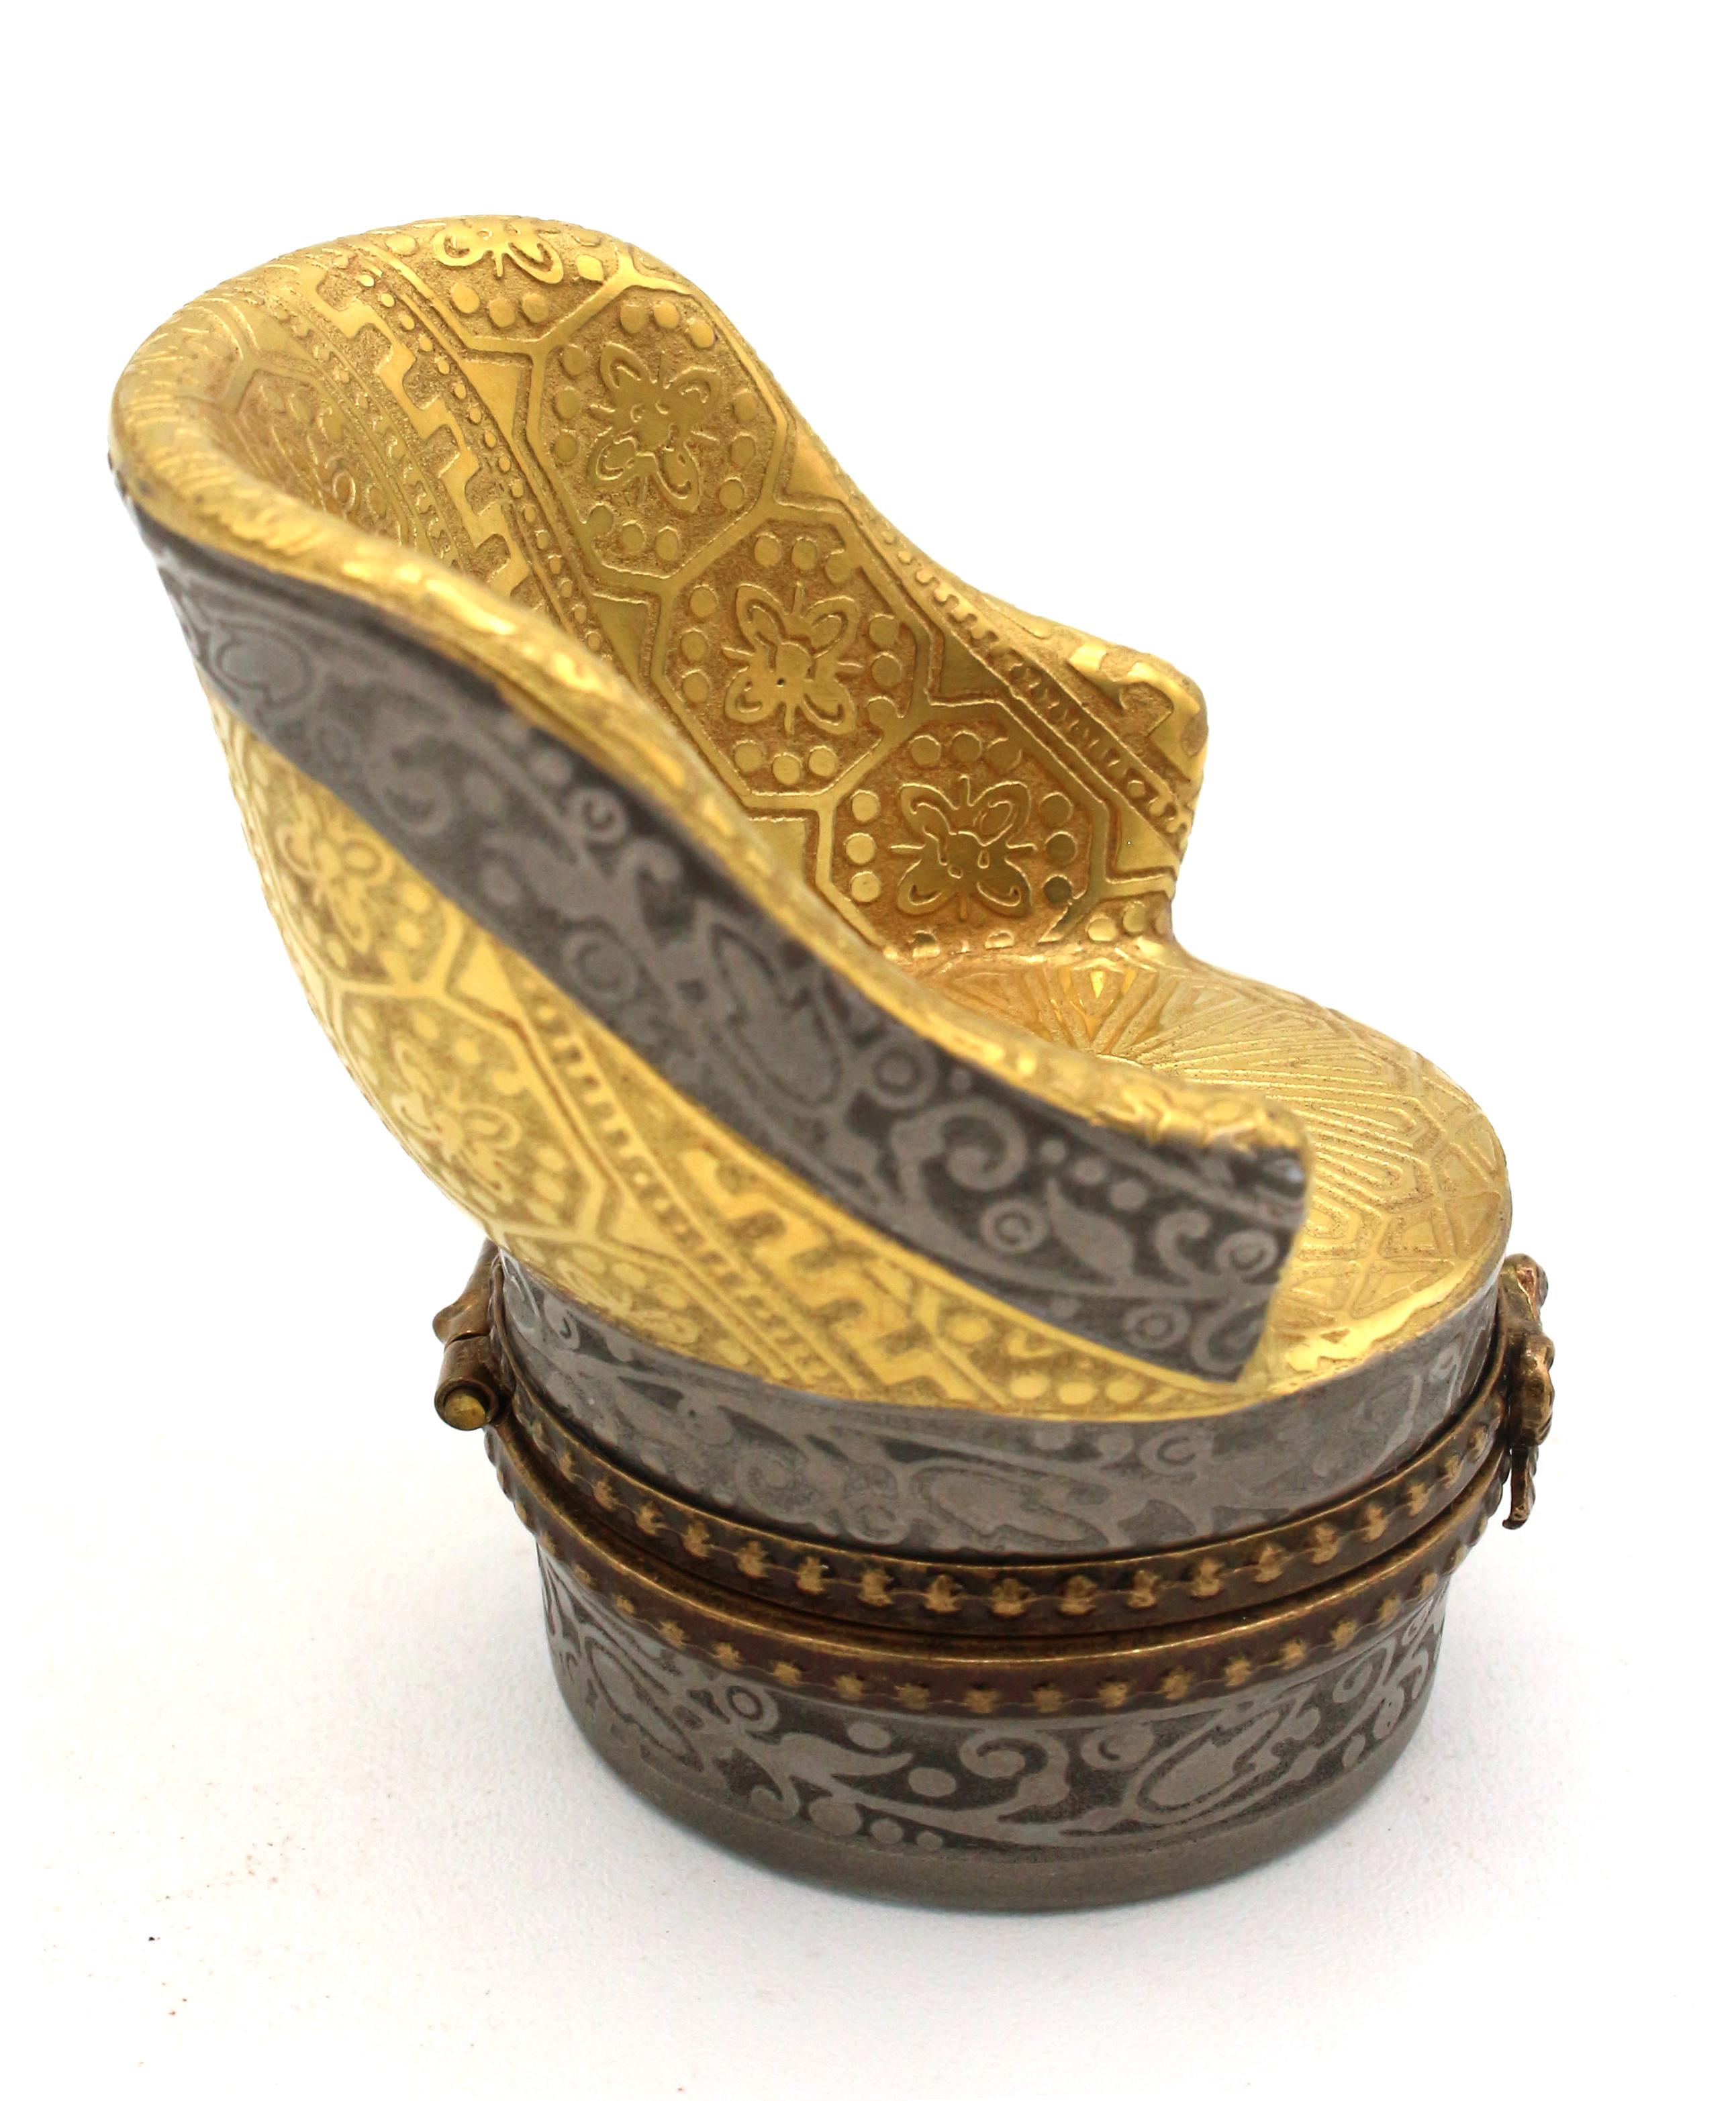 Limoges trinket or pill box in the form of a bergere chair, French later 20th century. 24k gold & silver encrused. Marked: Limoges France, Peint main, Incrustation or fin (painted by hand, fine gold inlay), & artist's mark. 
1 5/8